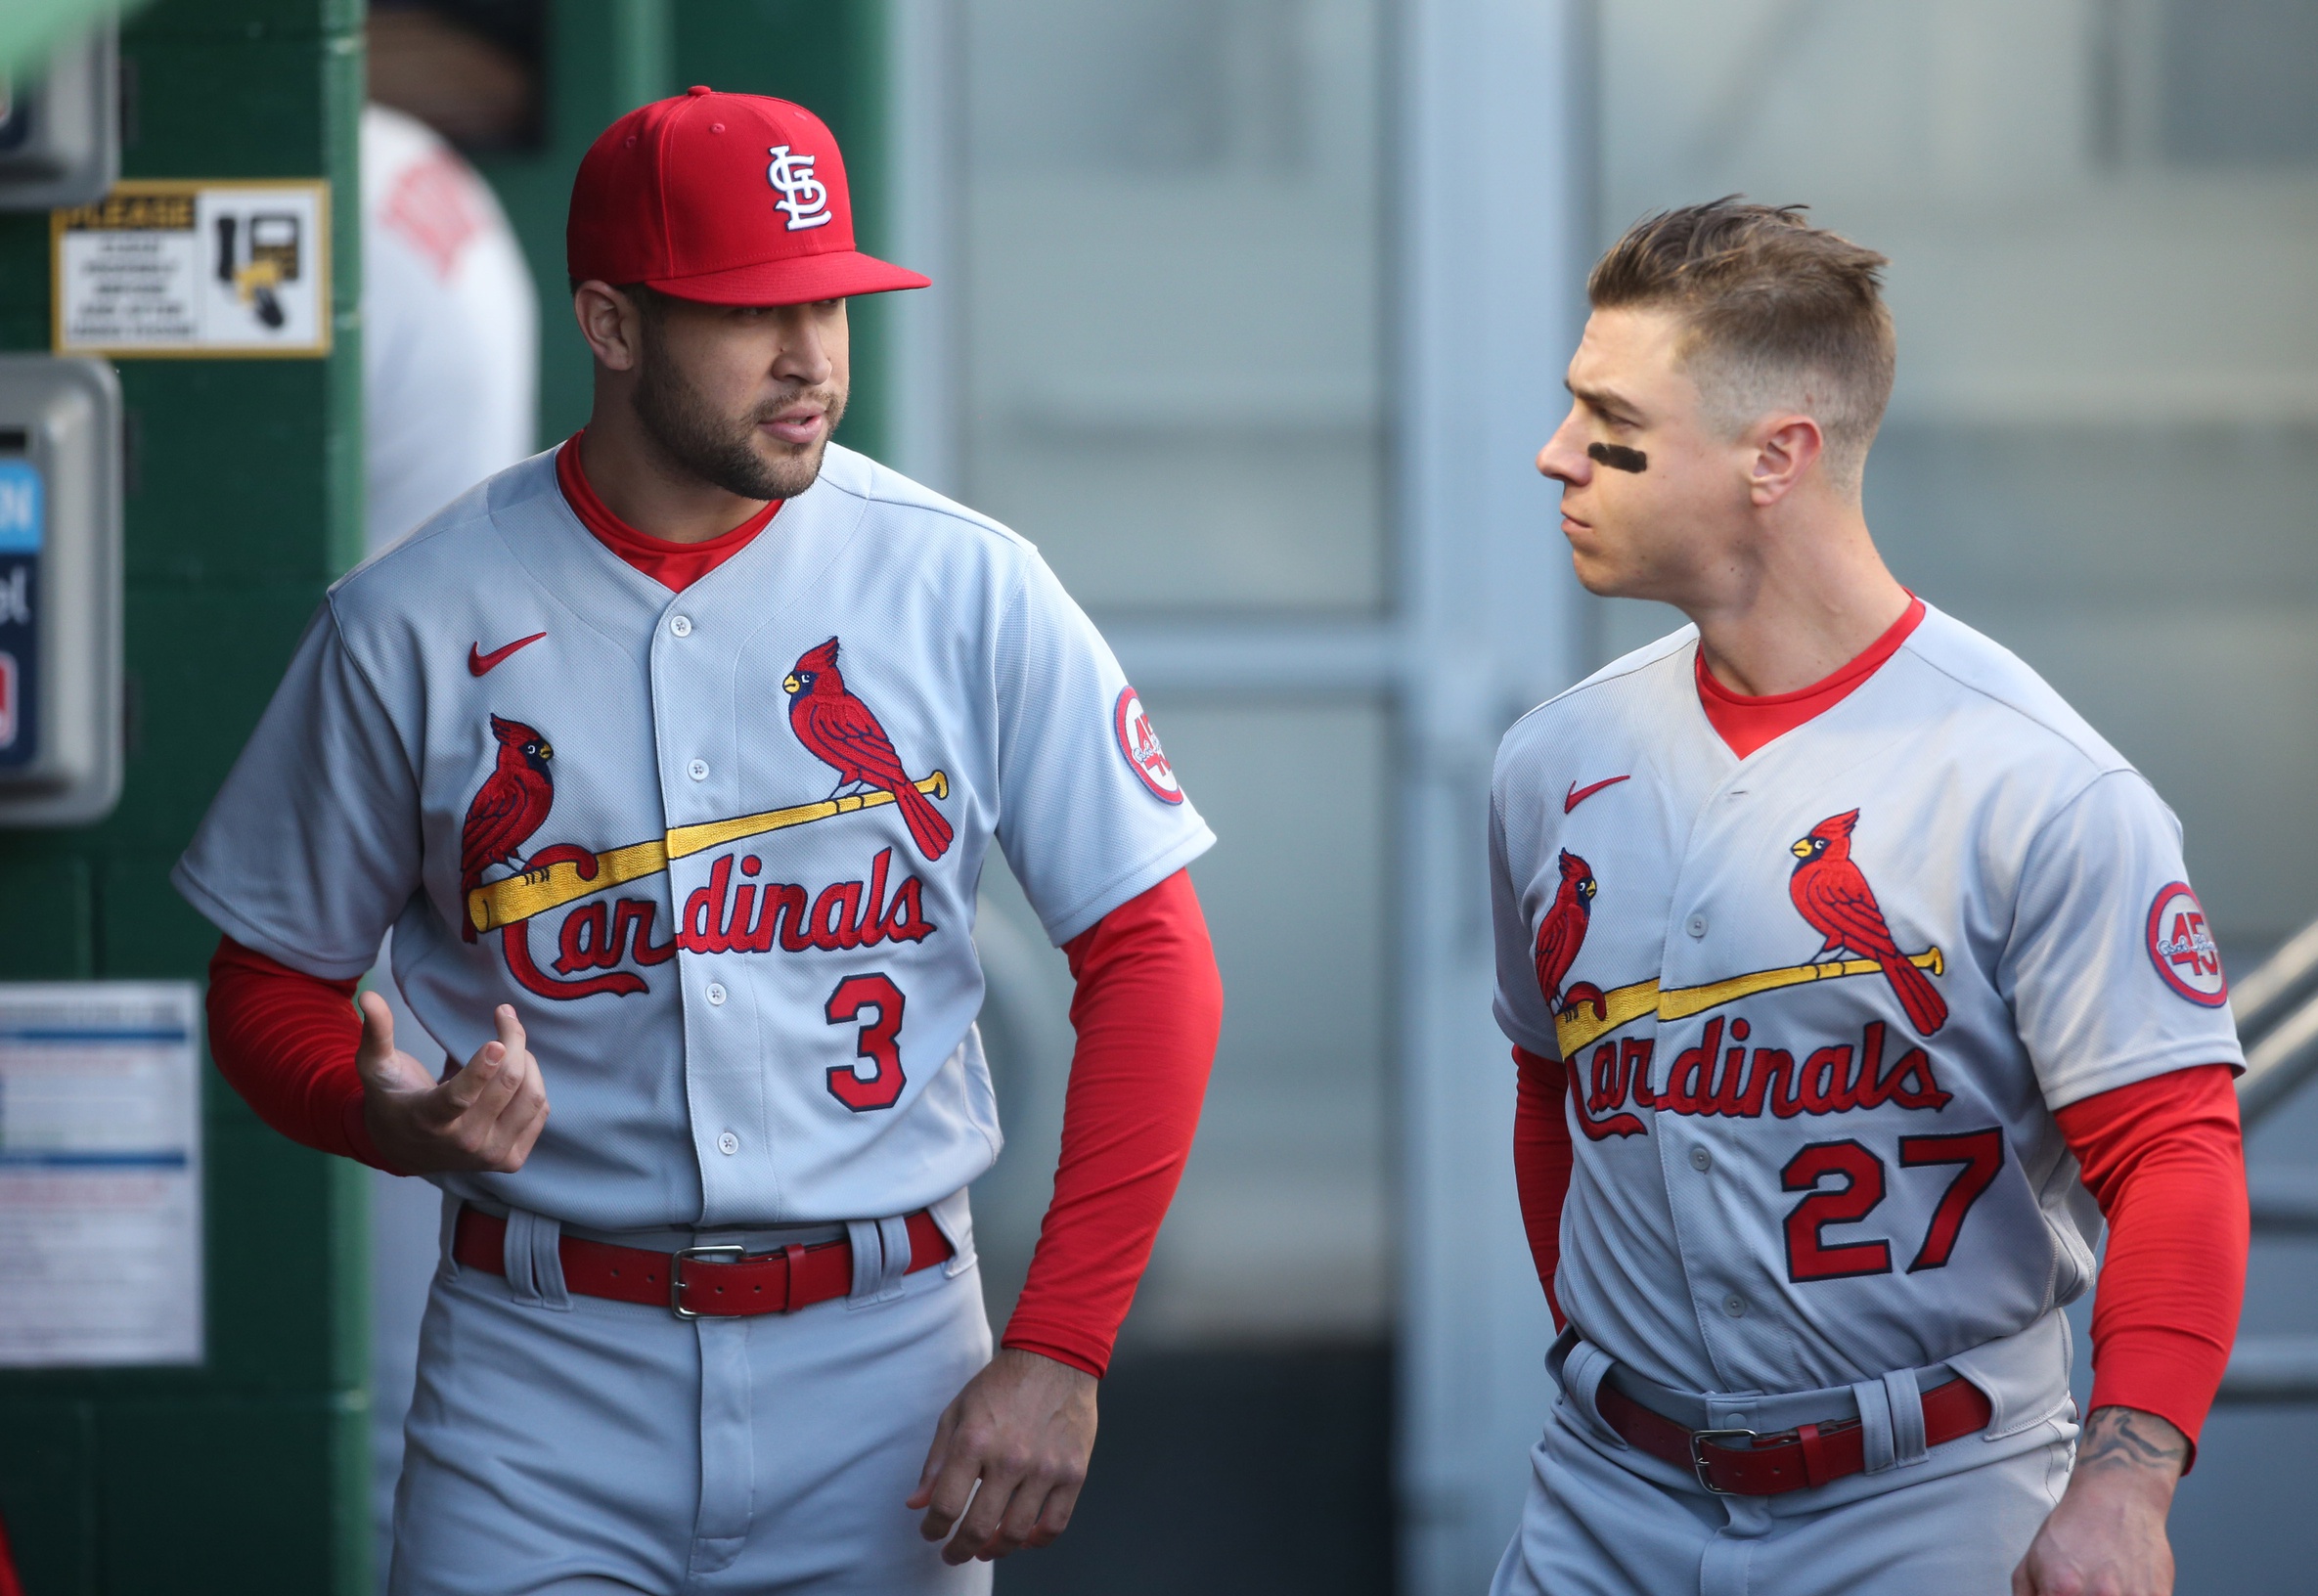 Bernie On The Cardinals: A Look At The Evolving Tyler O'Neill And Key Parts  Of The Cardinal Lineup - Scoops